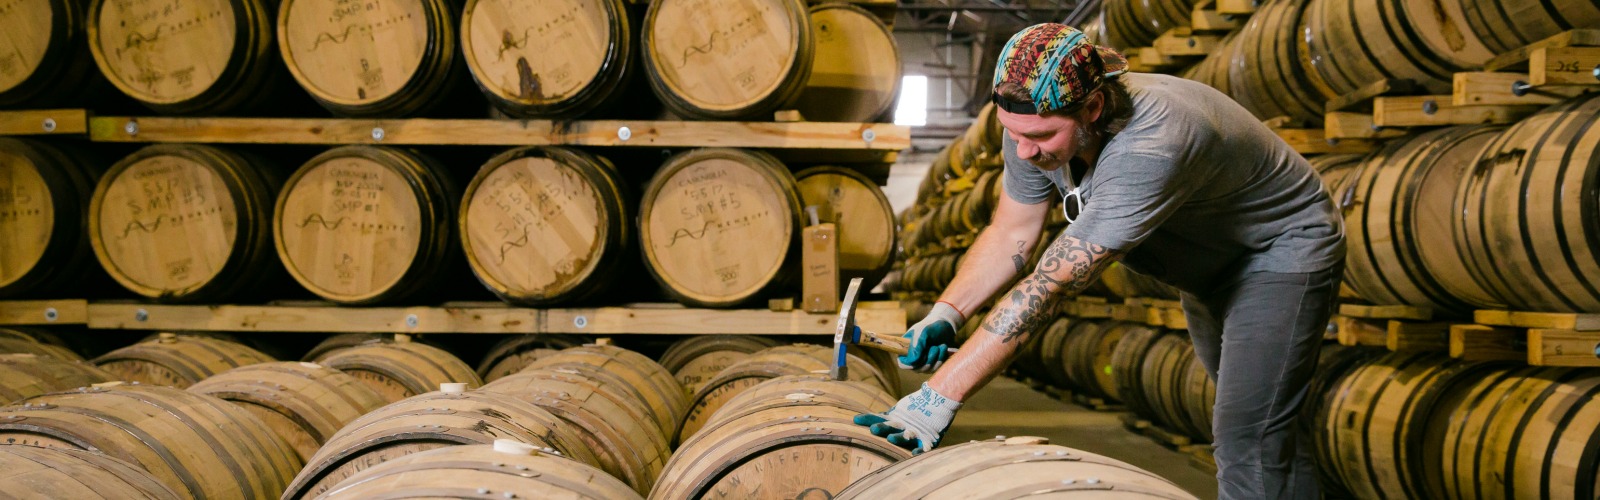 New Riff's bourbon has been barrel-aged for four years.